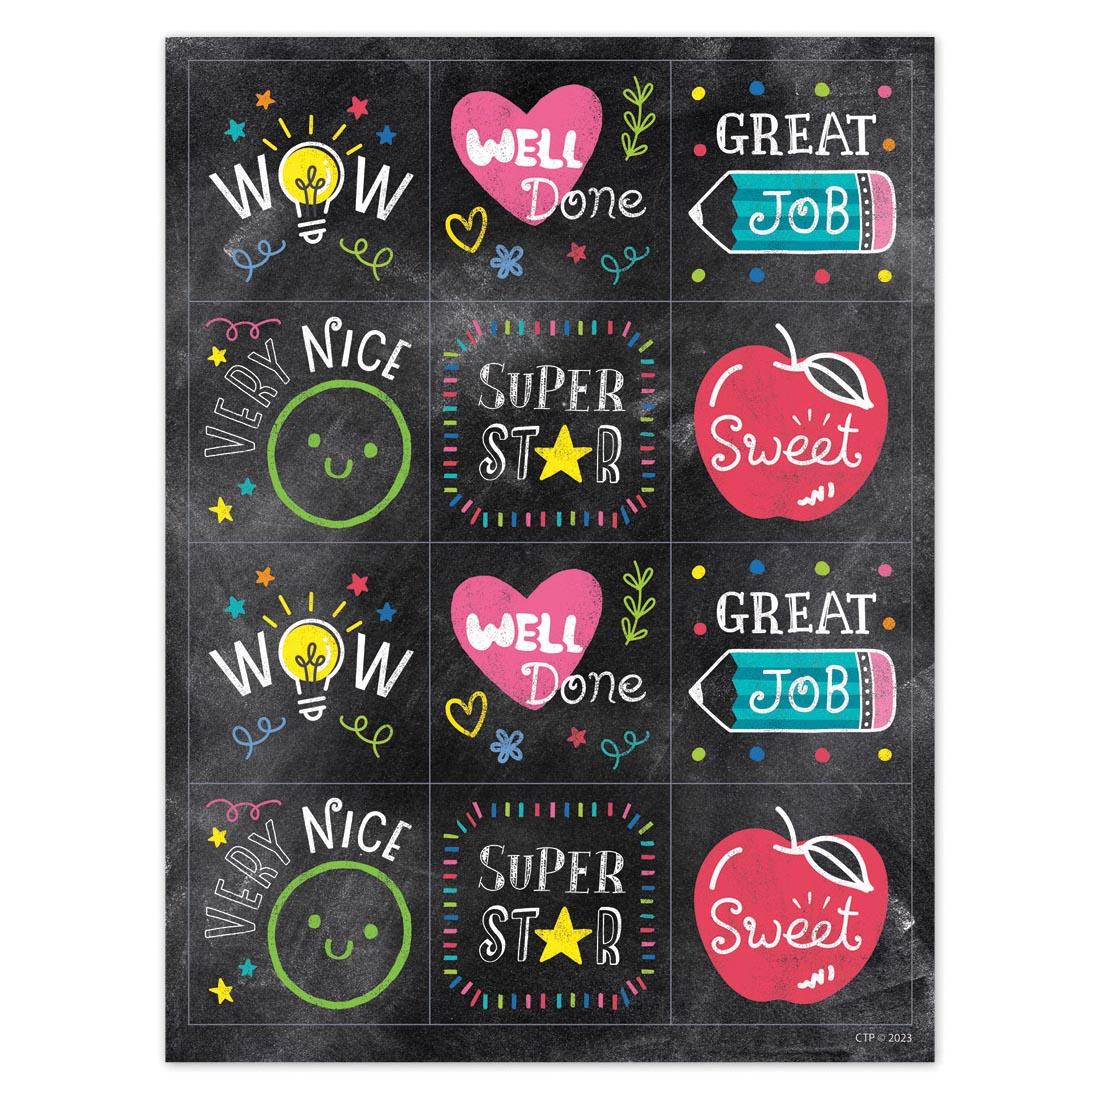 Colorful Chalk Reward Stickers from the Chalk It Up! Collection By Creative Teaching Press